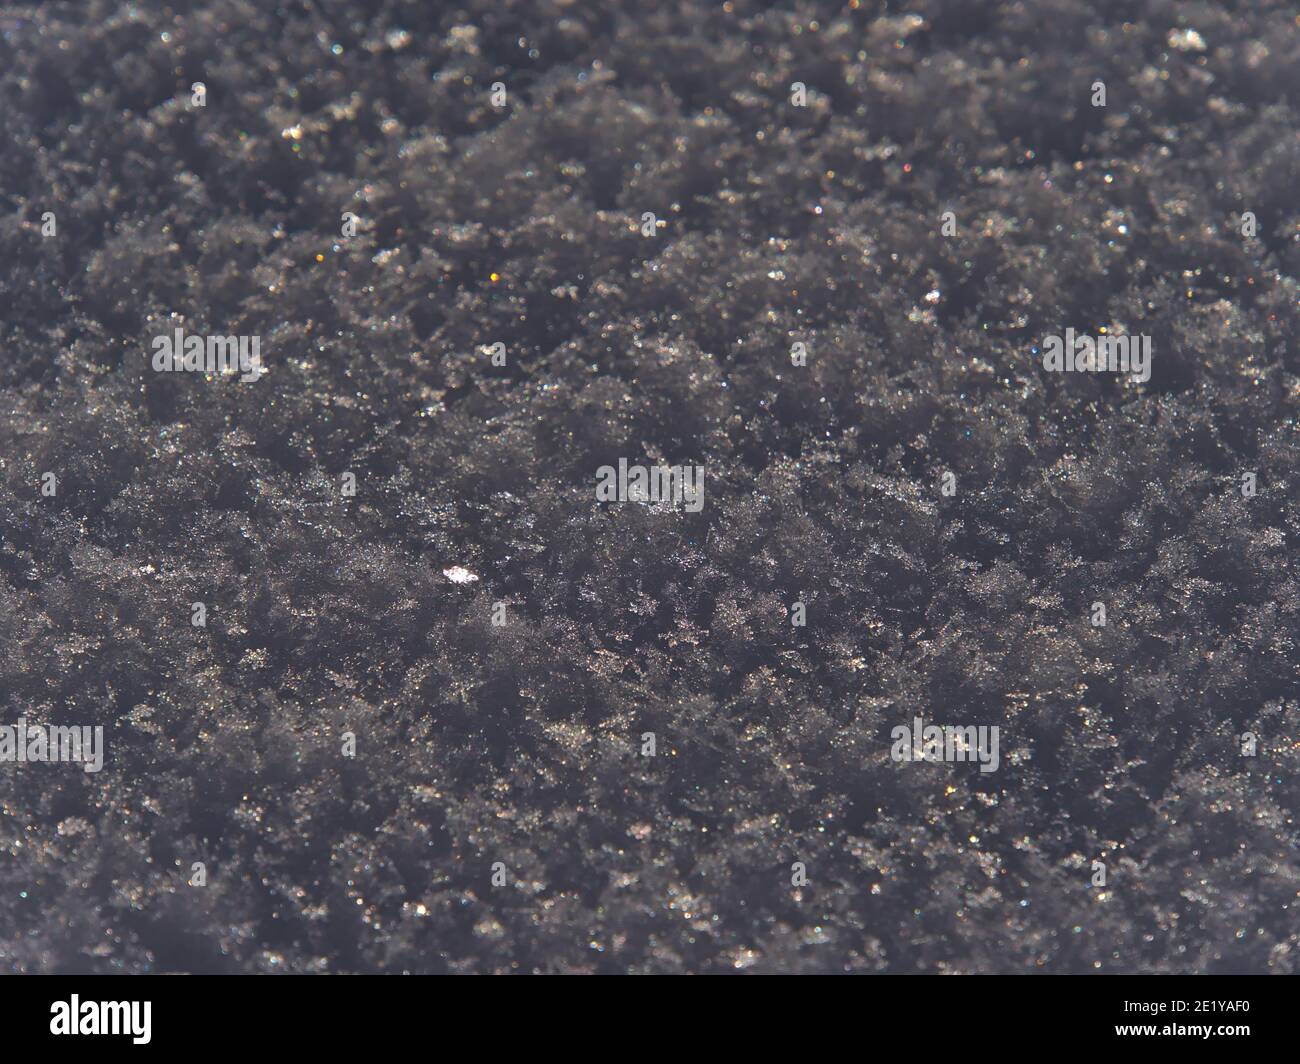 Close-up view with beautiful pattern of snow-covered meadow with ice crystals sparkling in the sunlight in winter season. Focus on center of image. Stock Photo